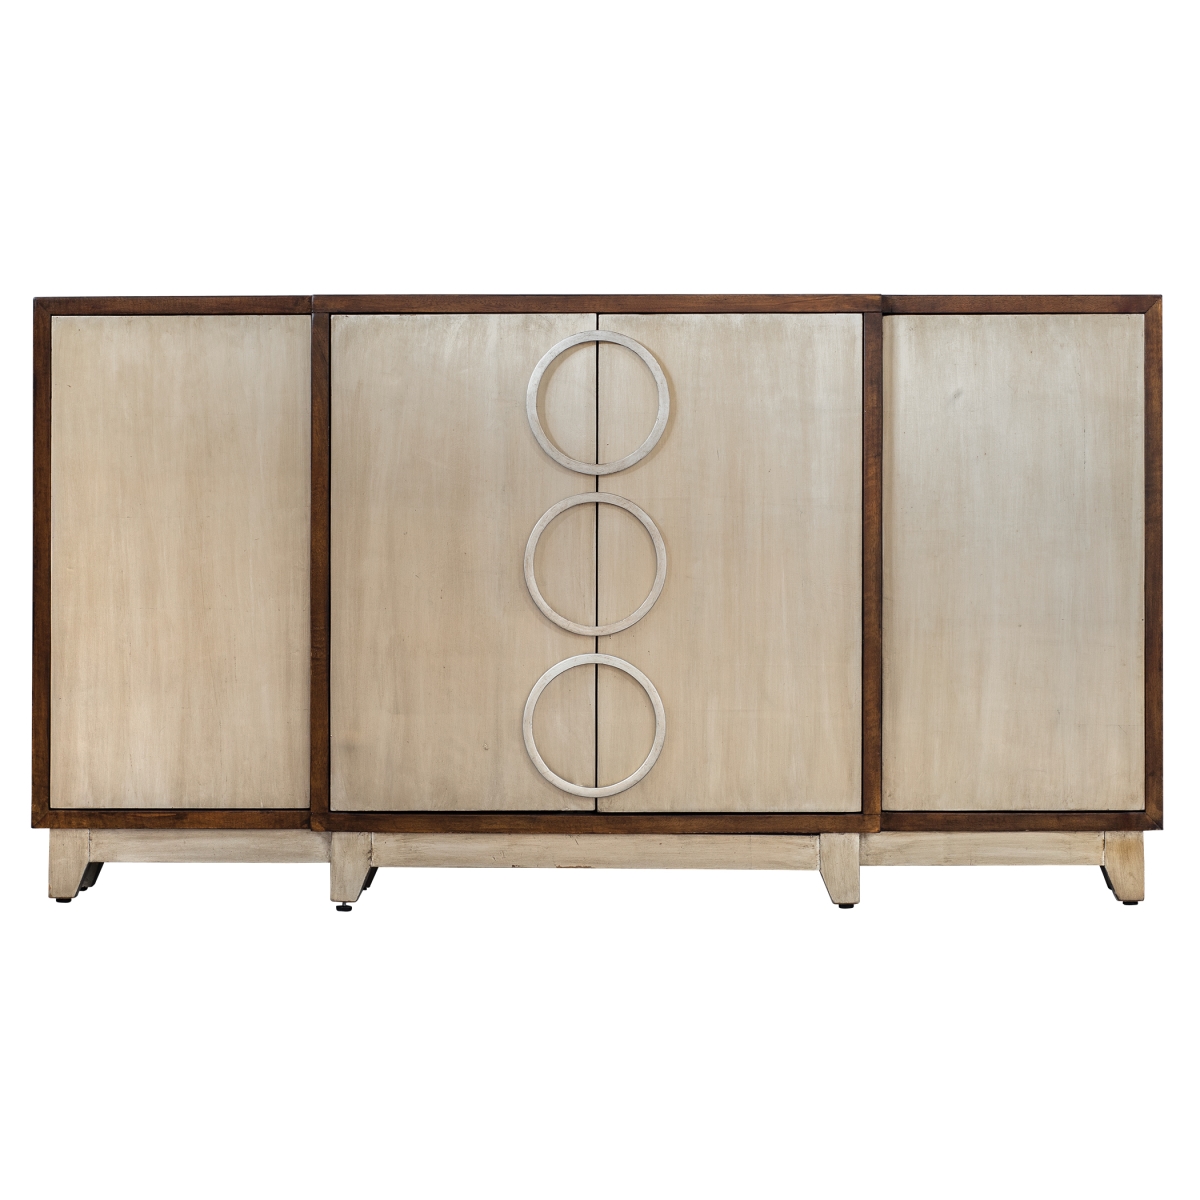 Picture of 212 Main 25451 Jacinta Modern Console Cabinet